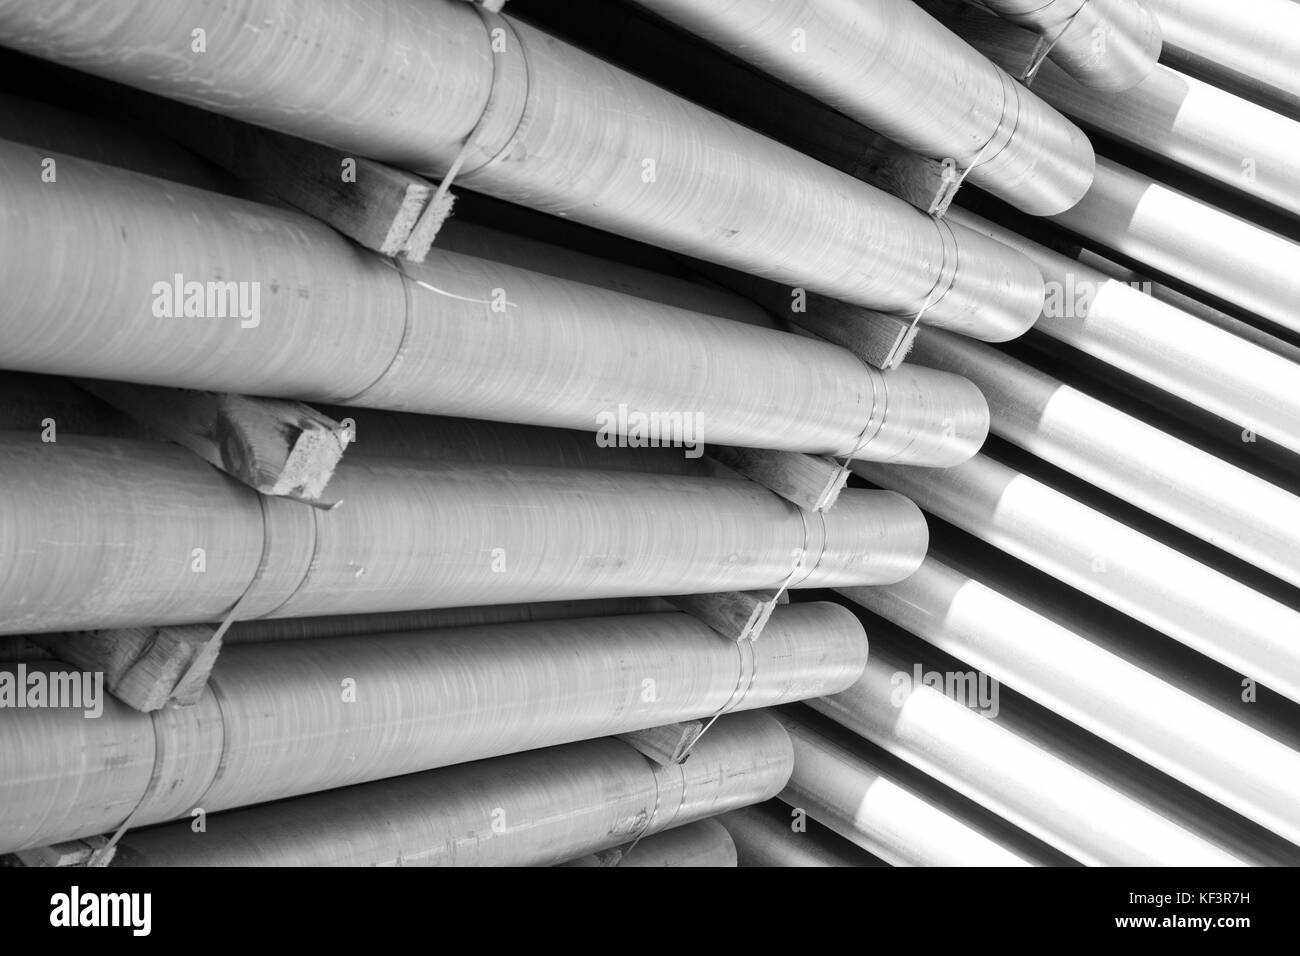 aluminum metal raw material in the form of long tubes Stock Photo